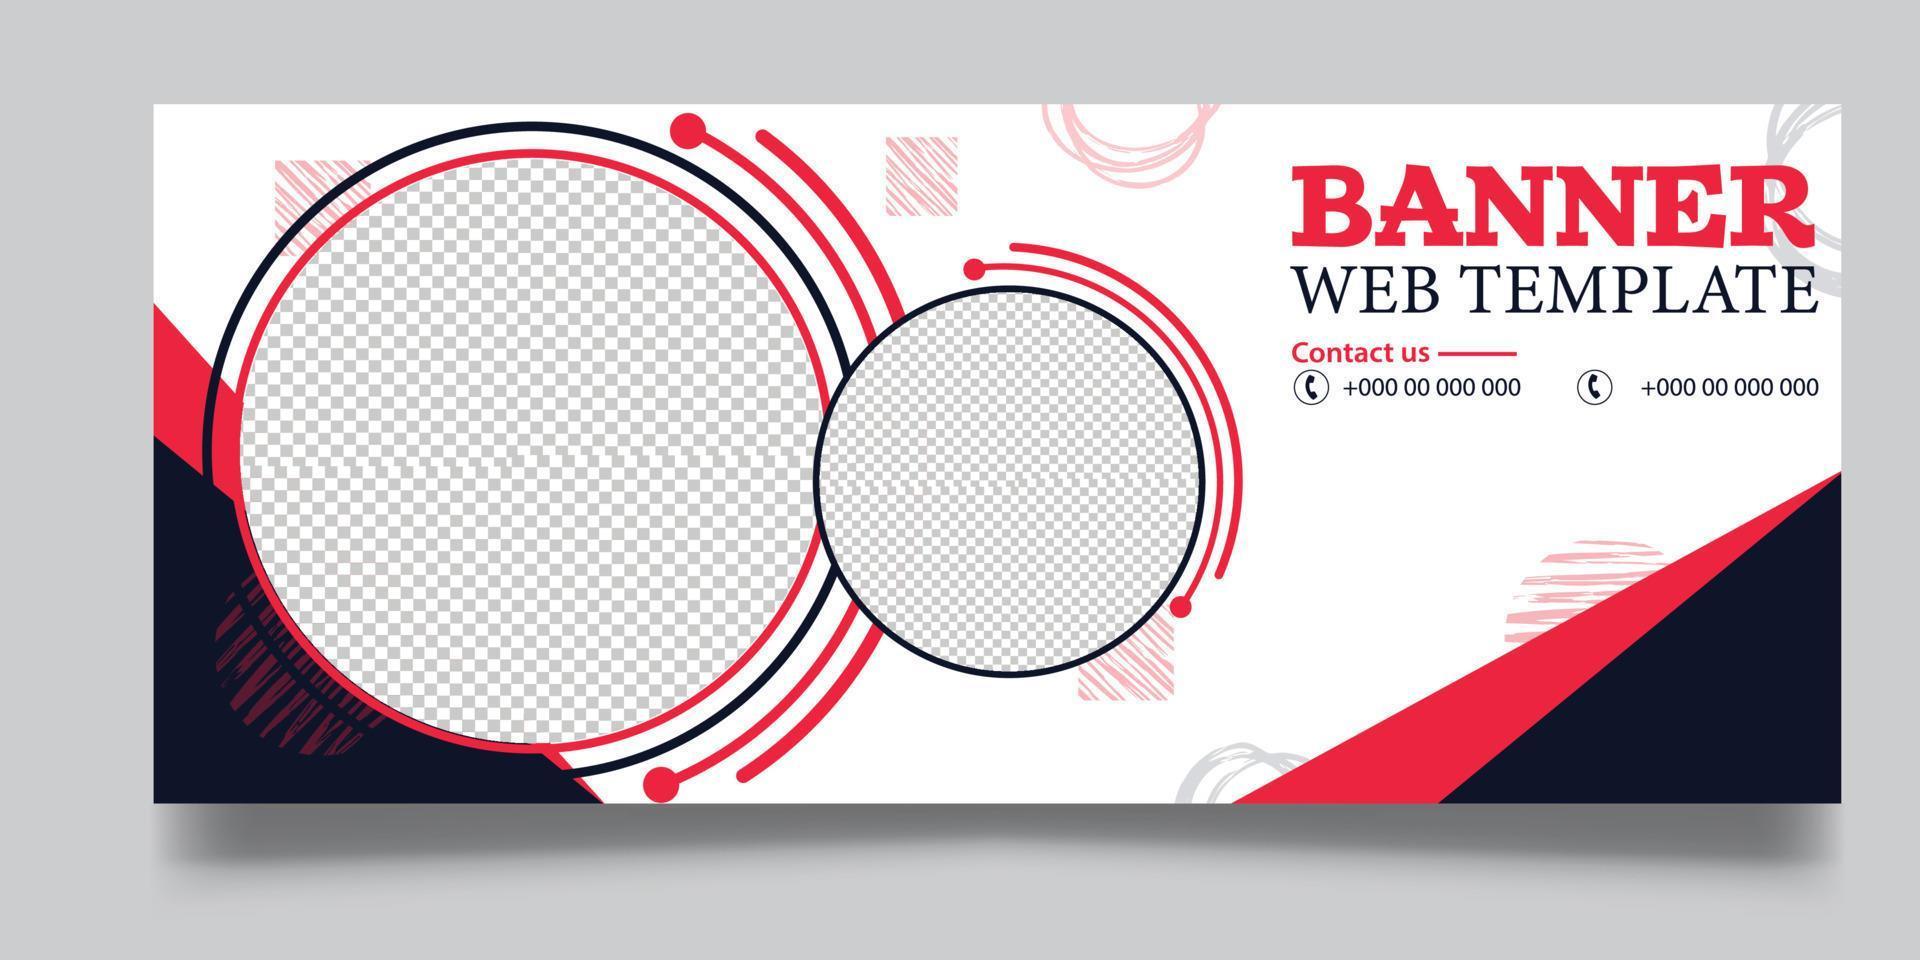 Web banner poster template for business and finance vector